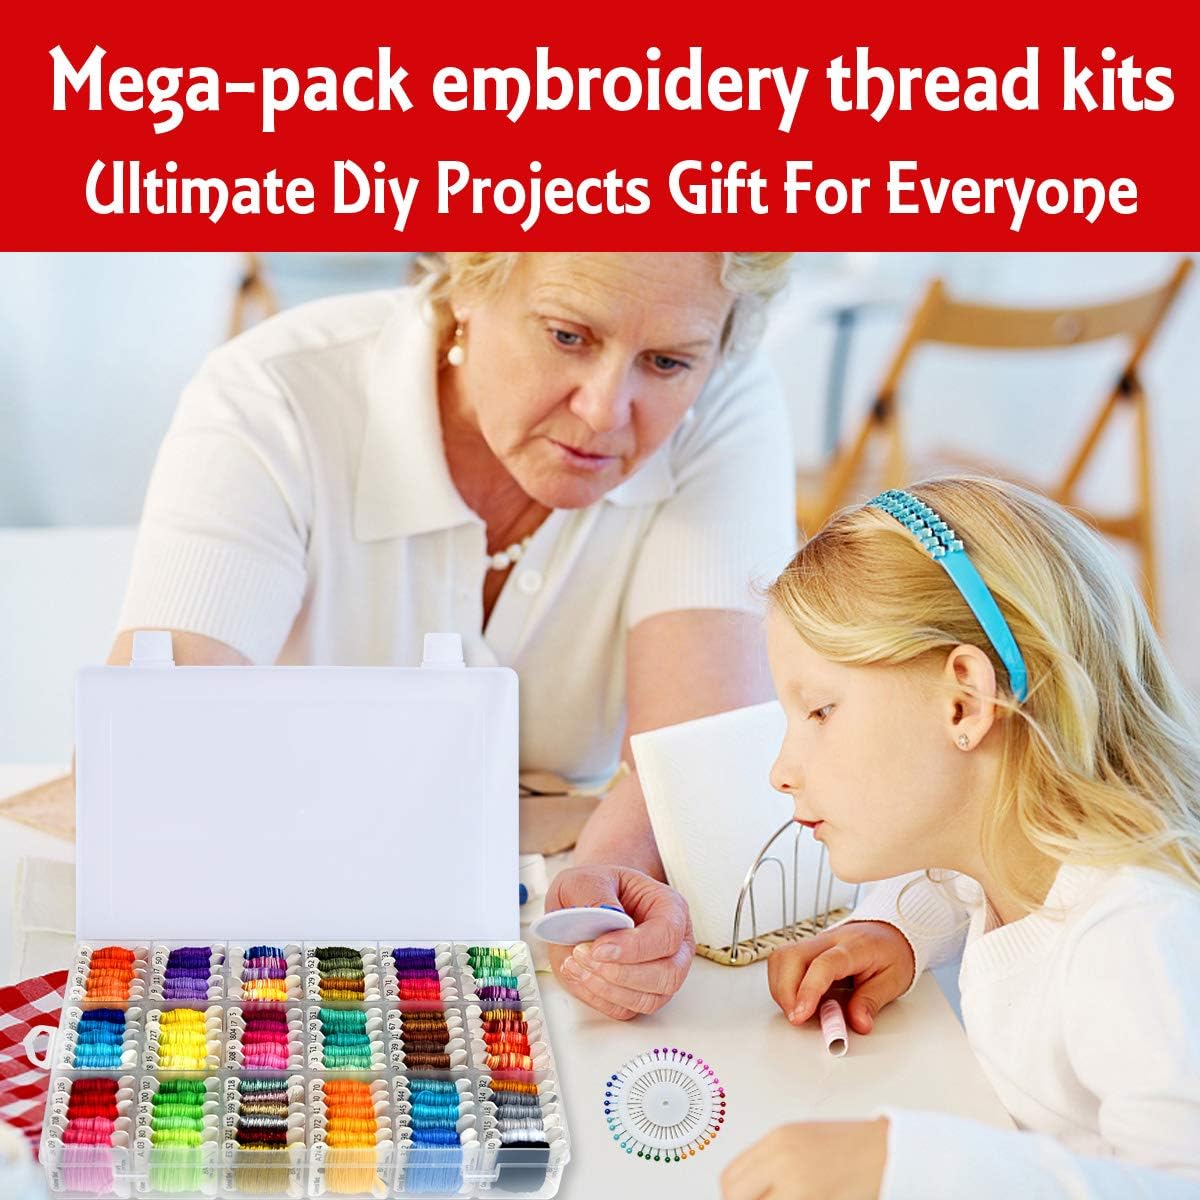 Embroidery Floss Cross Stitch Threads String Kits with Organizer Storage Box Included 108pcs Colorful Friendship Bracelets Floss with Number Stickers&Floss Bobbins &110 Pcs Cross Stitch Tool Kits